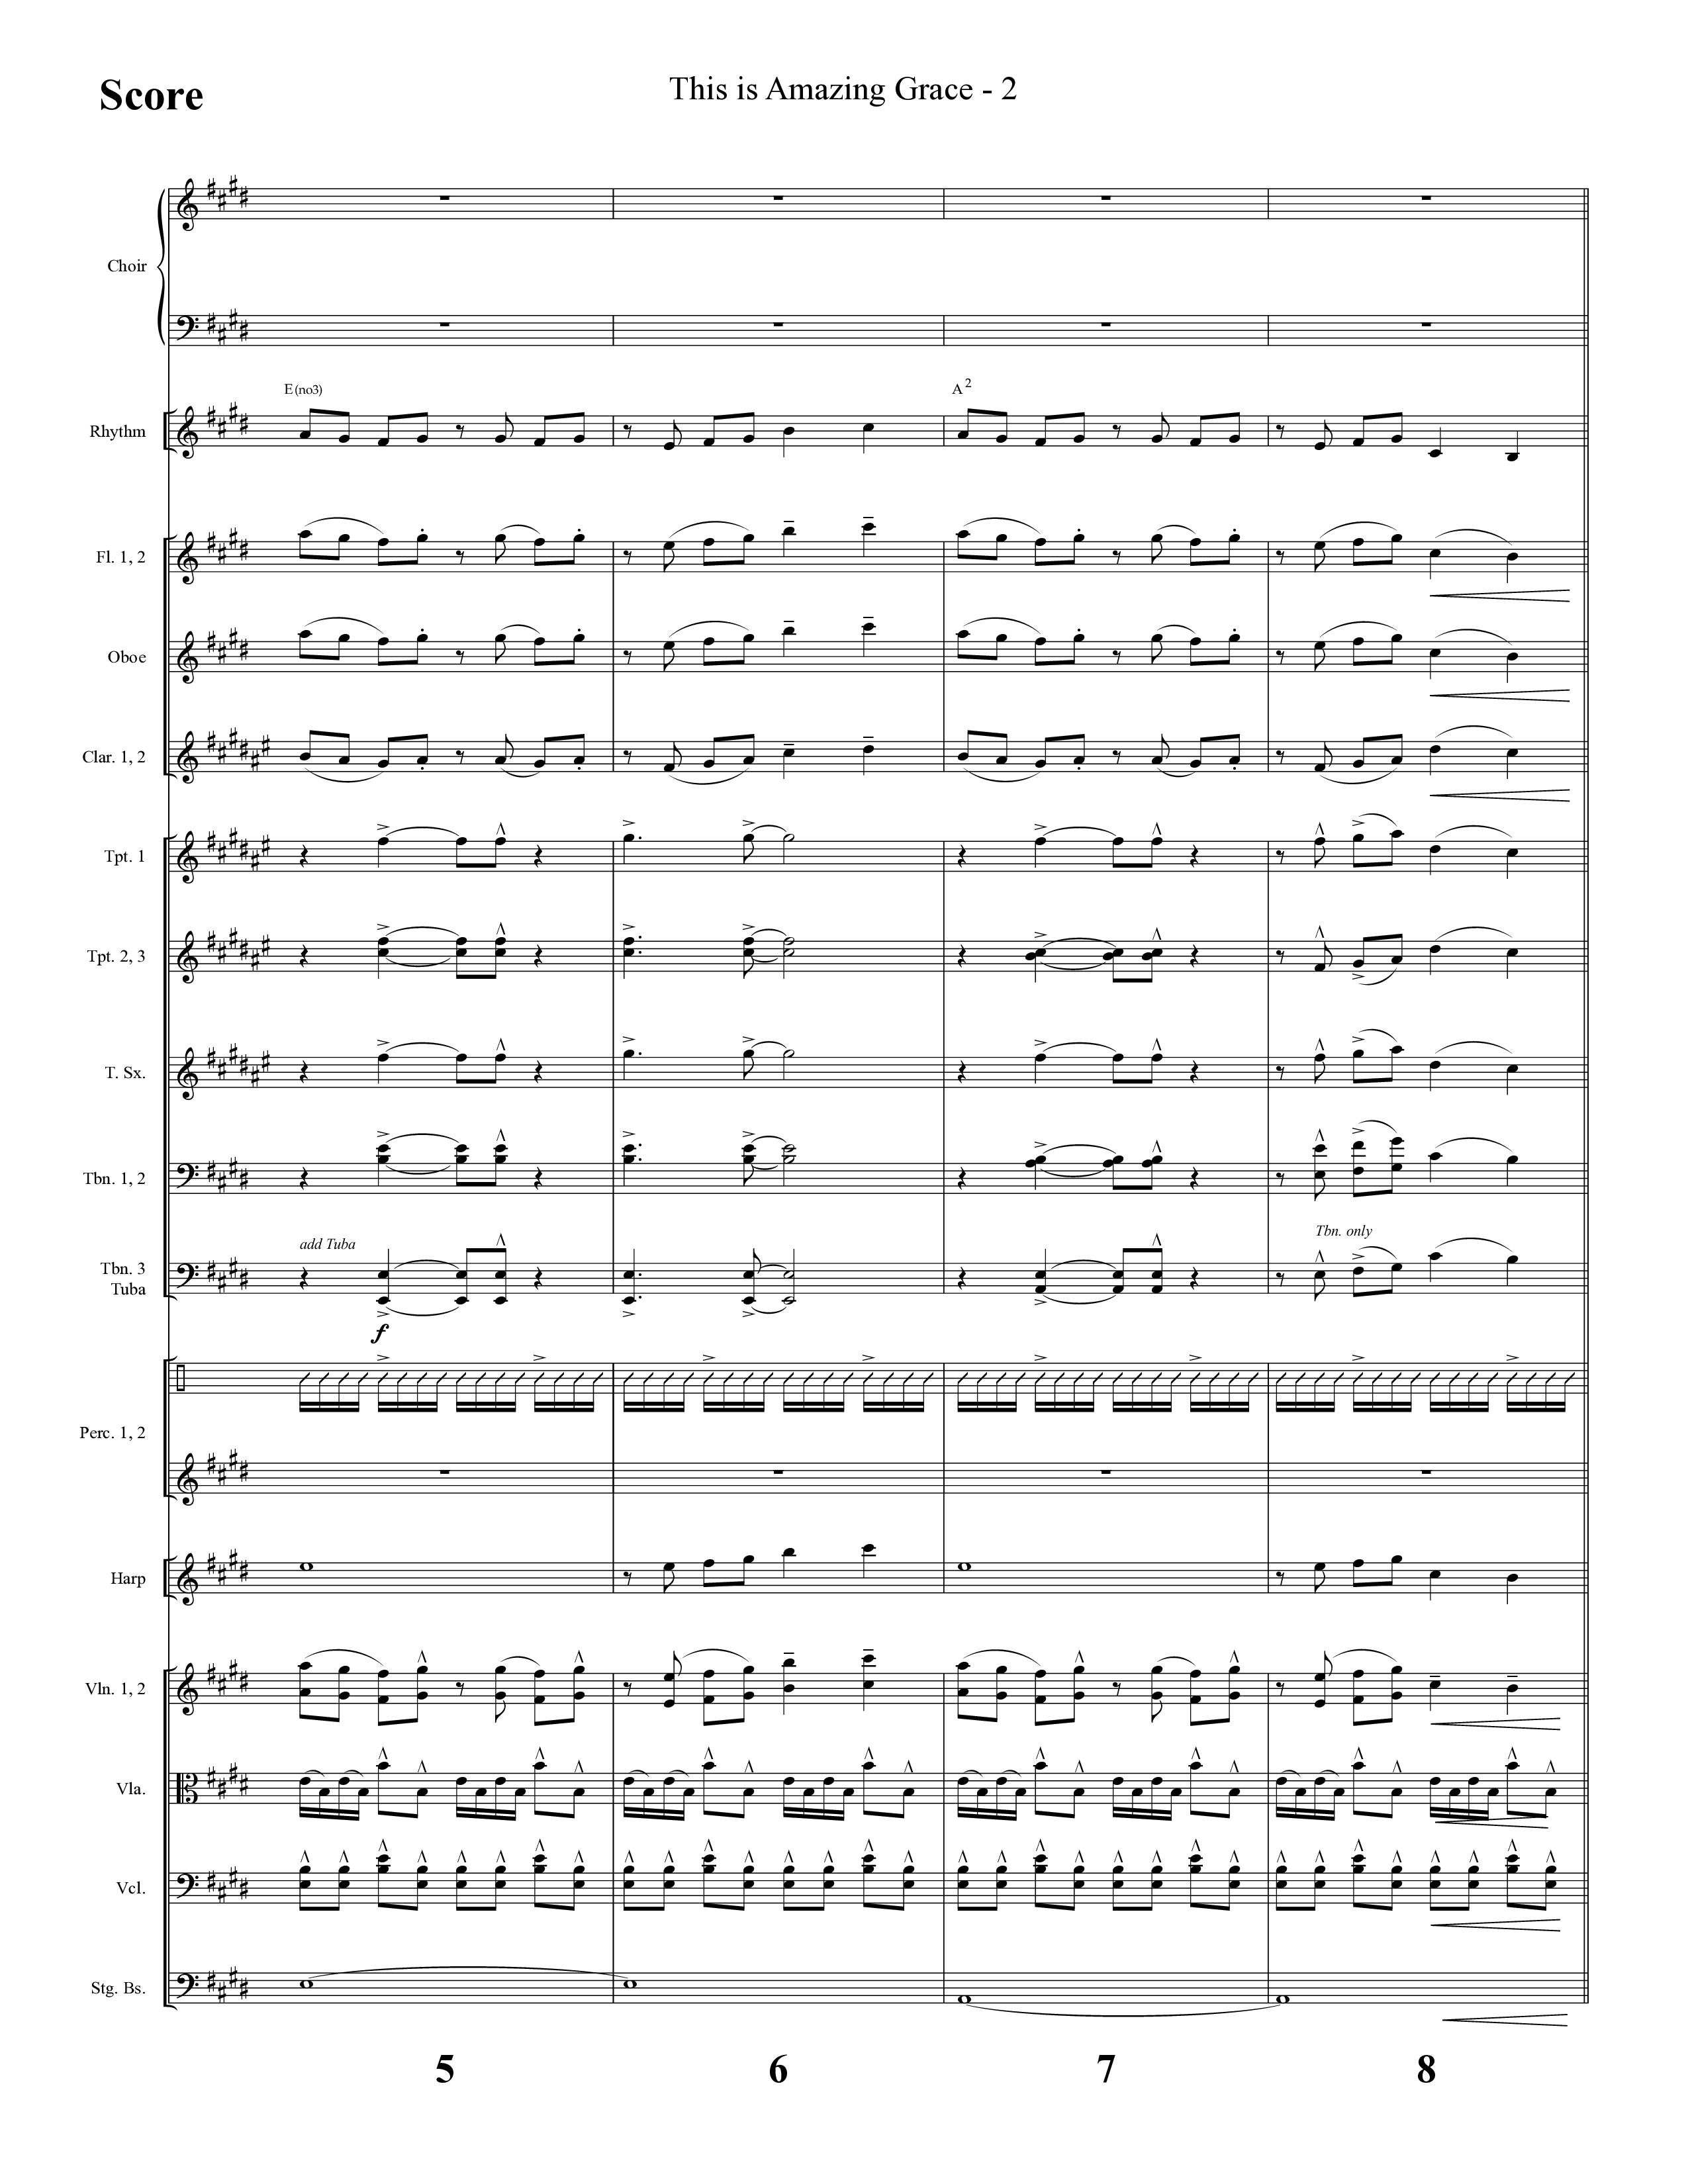 This Is Amazing Grace (Choral Anthem SATB) Conductor's Score (Lifeway Choral / Arr. Cliff Duren)